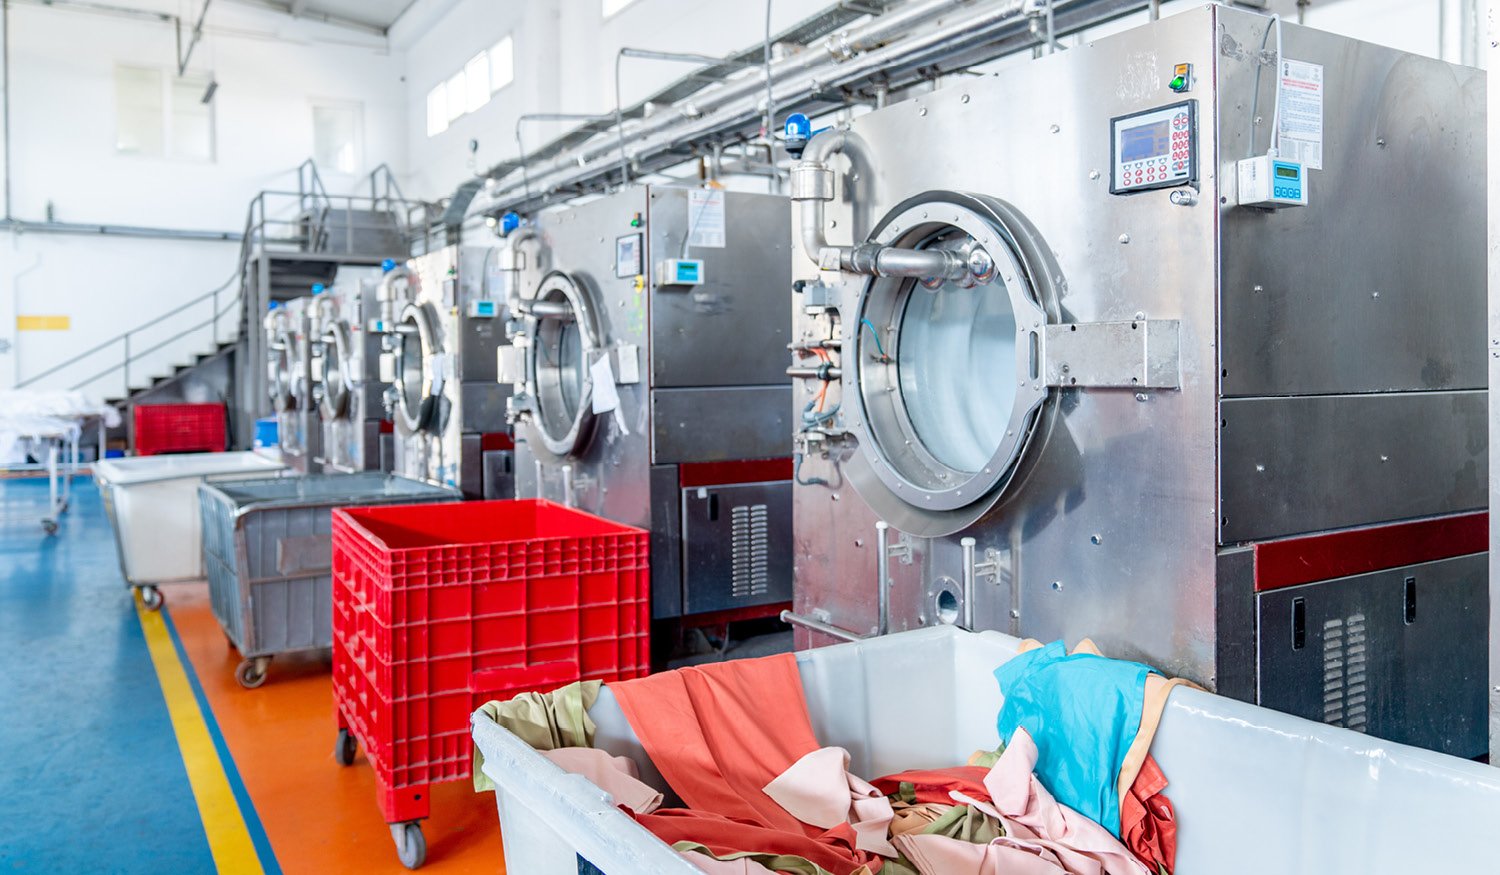 POV: Industrial Laundry - Trying to Wring out Profitability